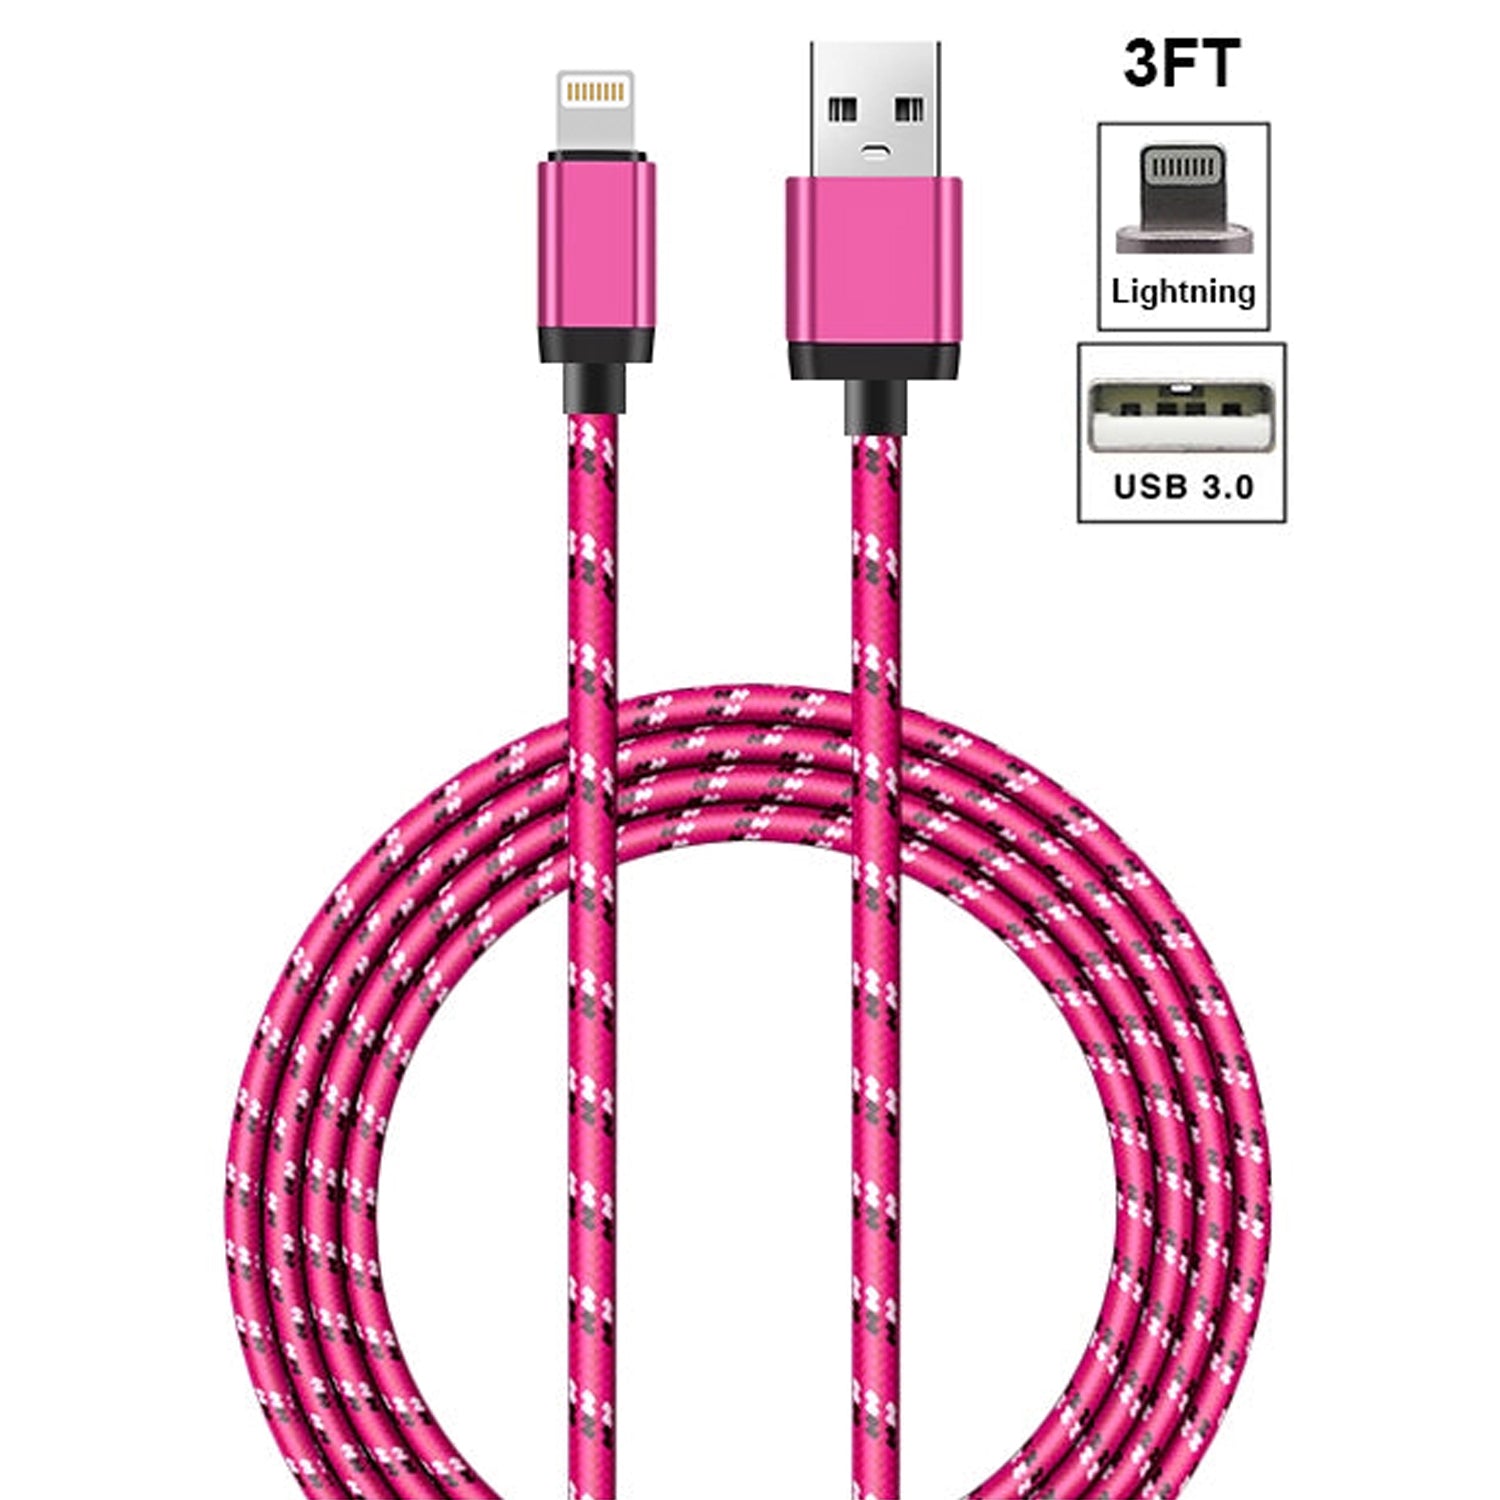 Woven Braided Fast Charge Cable for iPhone Woven Braided Dual Color Cable for iPhone 11/11 Pro /11 Pro Max/ Xs Max/ X / XS/ 8 / 7  (3FT)  (3FT)